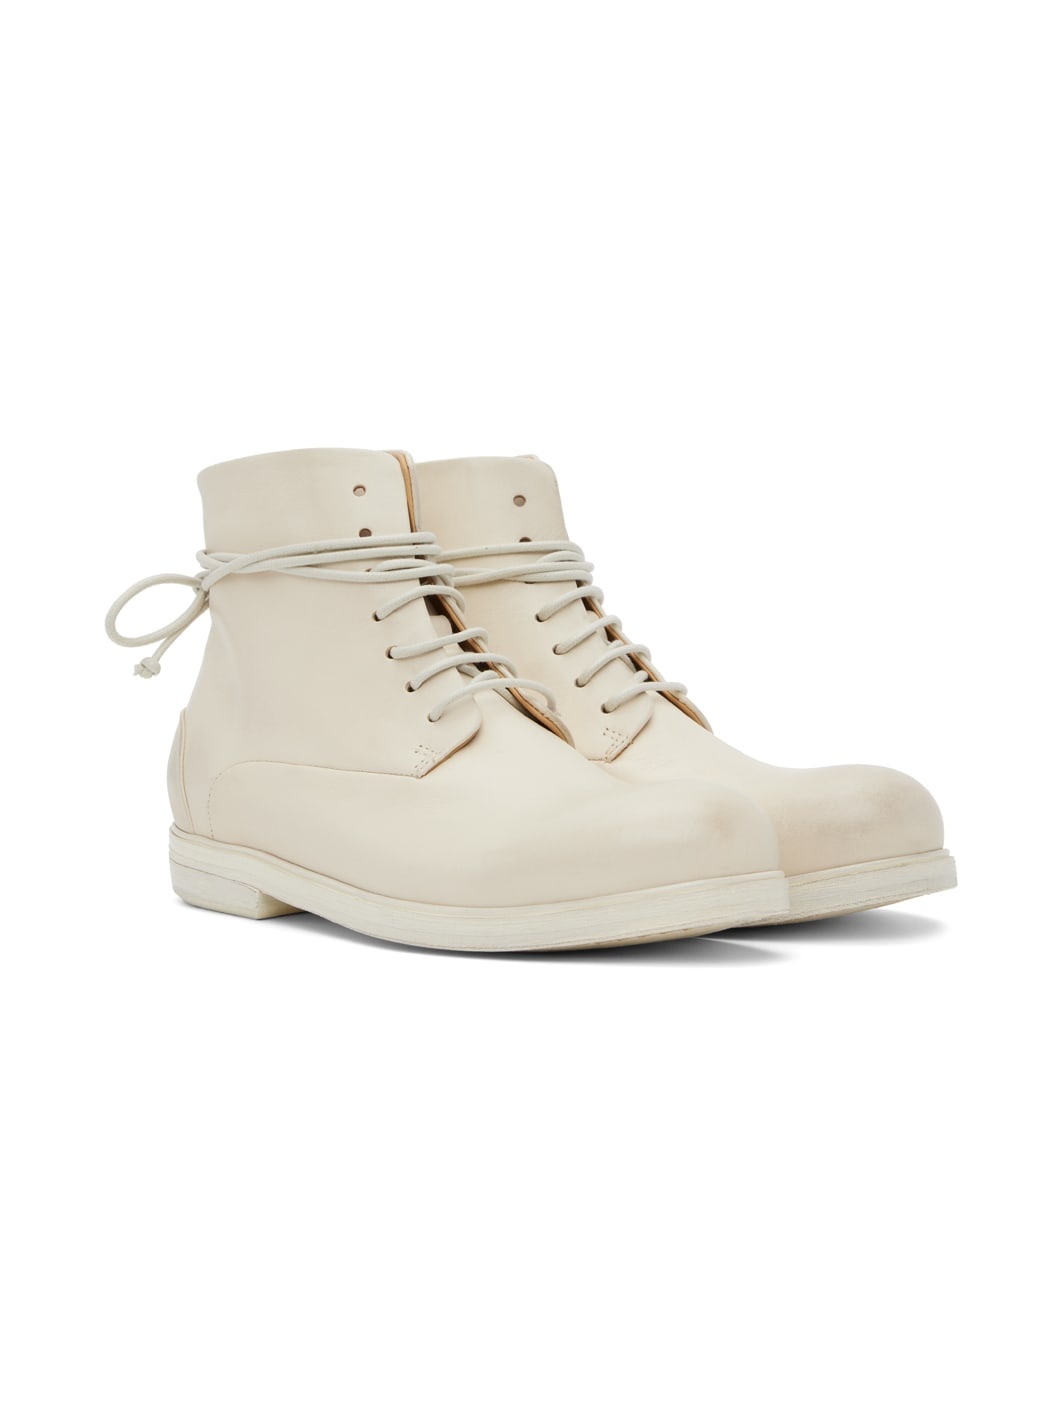 Off-White Zucca Media Boots - 4